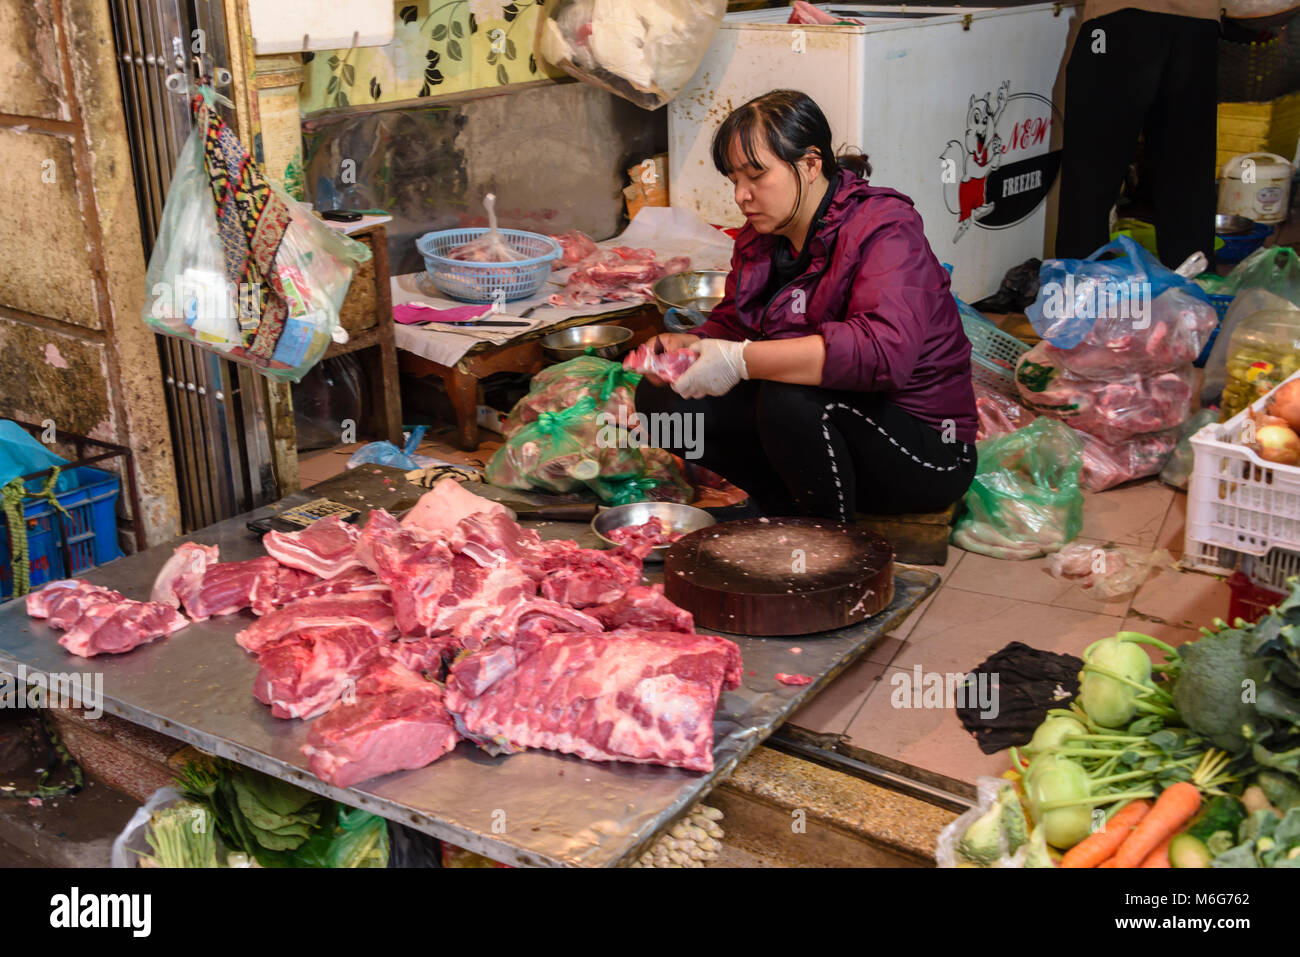 A woman cuts up meat on the floor of her shop and footpath in Hanoi, Vietnam Stock Photo